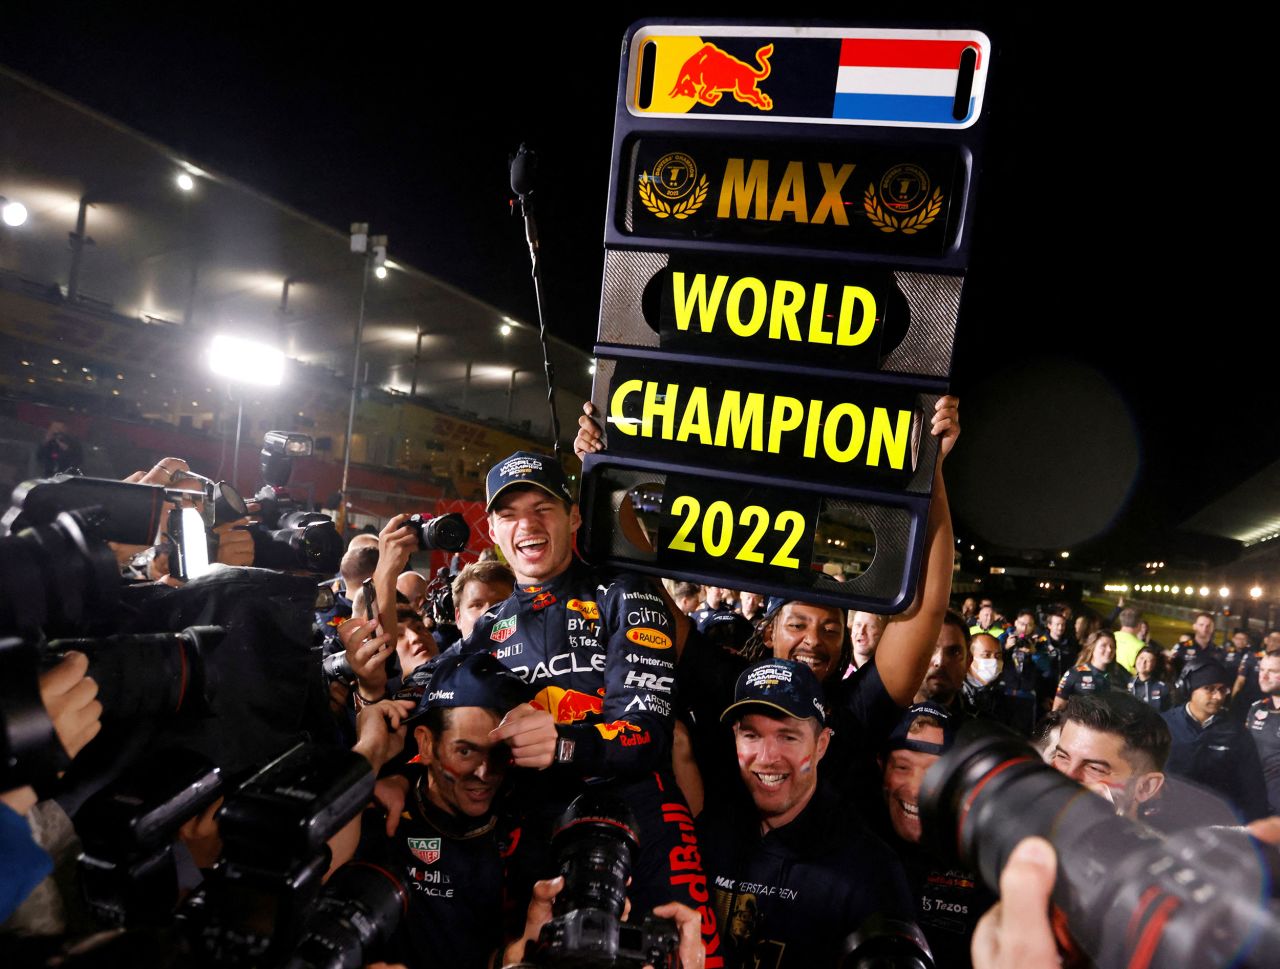 Formula One driver Max Verstappen celebrates with his team after winning the Japanese Grand Prix <a href="https://www.cnn.com/2022/10/09/motorsport/max-verstappen-japanese-grand-prix-spt-intl" target="_blank">to clinch his second-straight drivers' title</a> on Sunday, October 9.